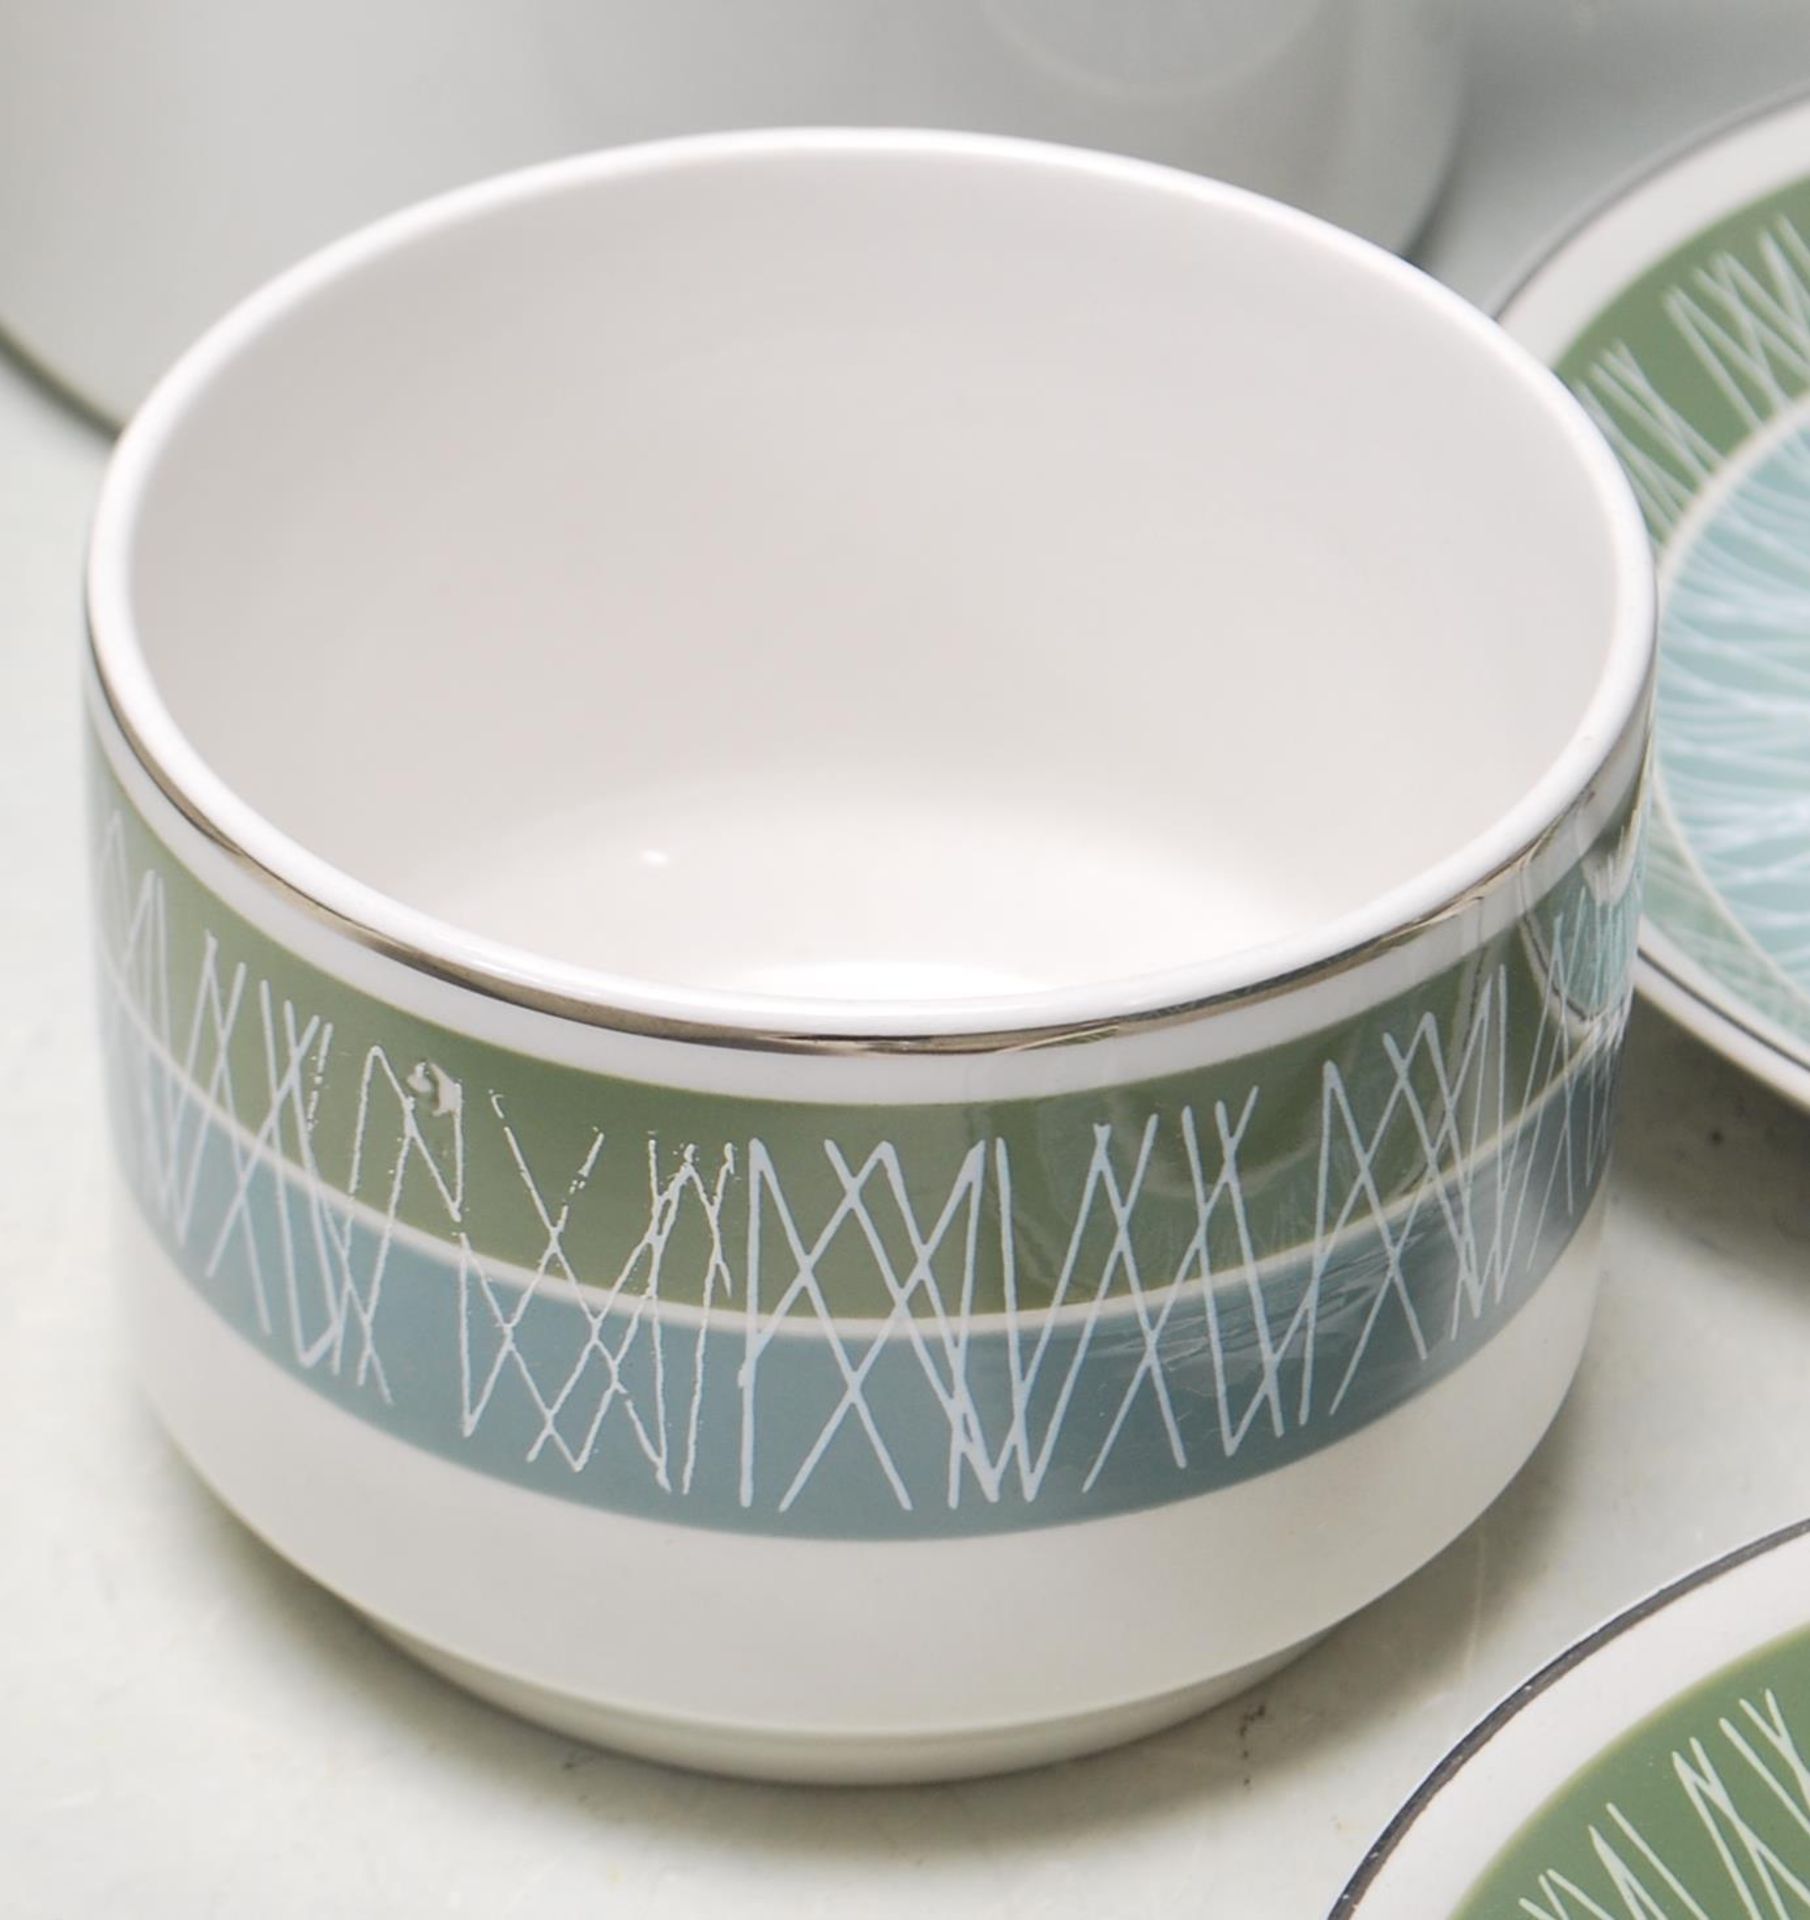 RETRO VINTAGE LATE 20TH CENTURY DINNER SERVICE BY MIDWINTER AND JG MEAKIN STUDIO. - Image 12 of 14